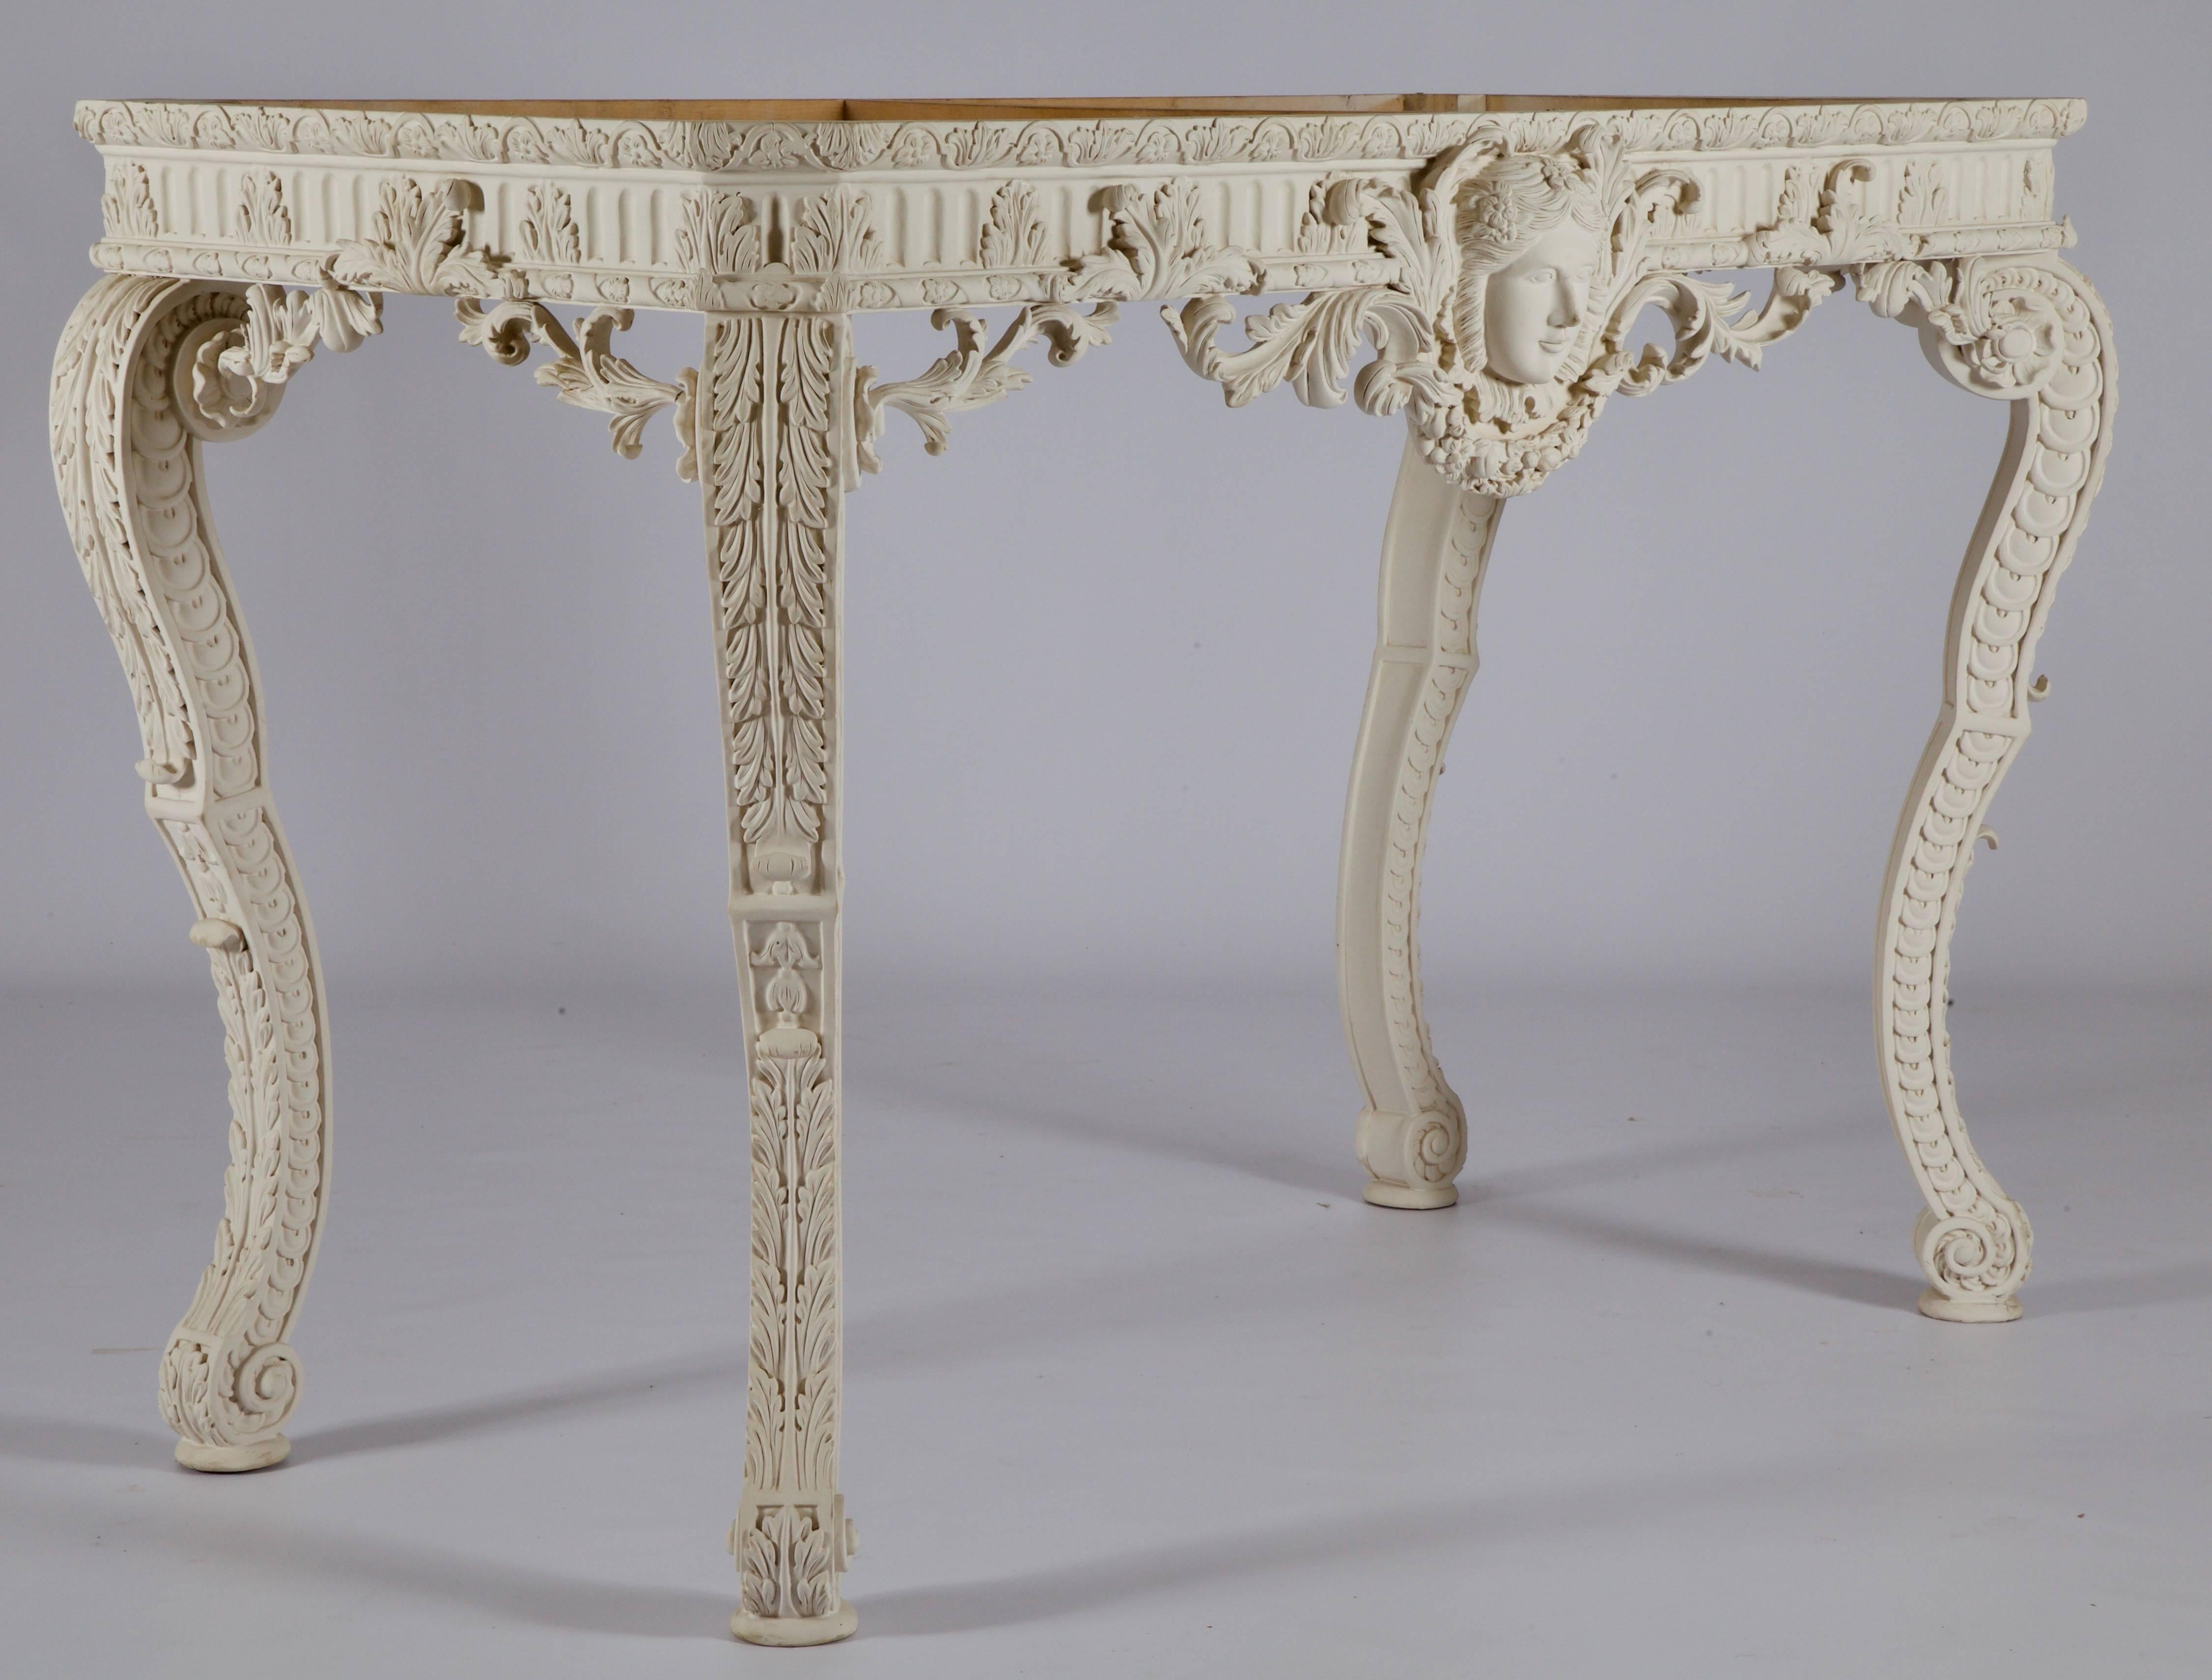 Hand-carved wood console in the Louis XIV style finished in a white gesso.
We can supply marble-top (large selection of colors) on quotation.